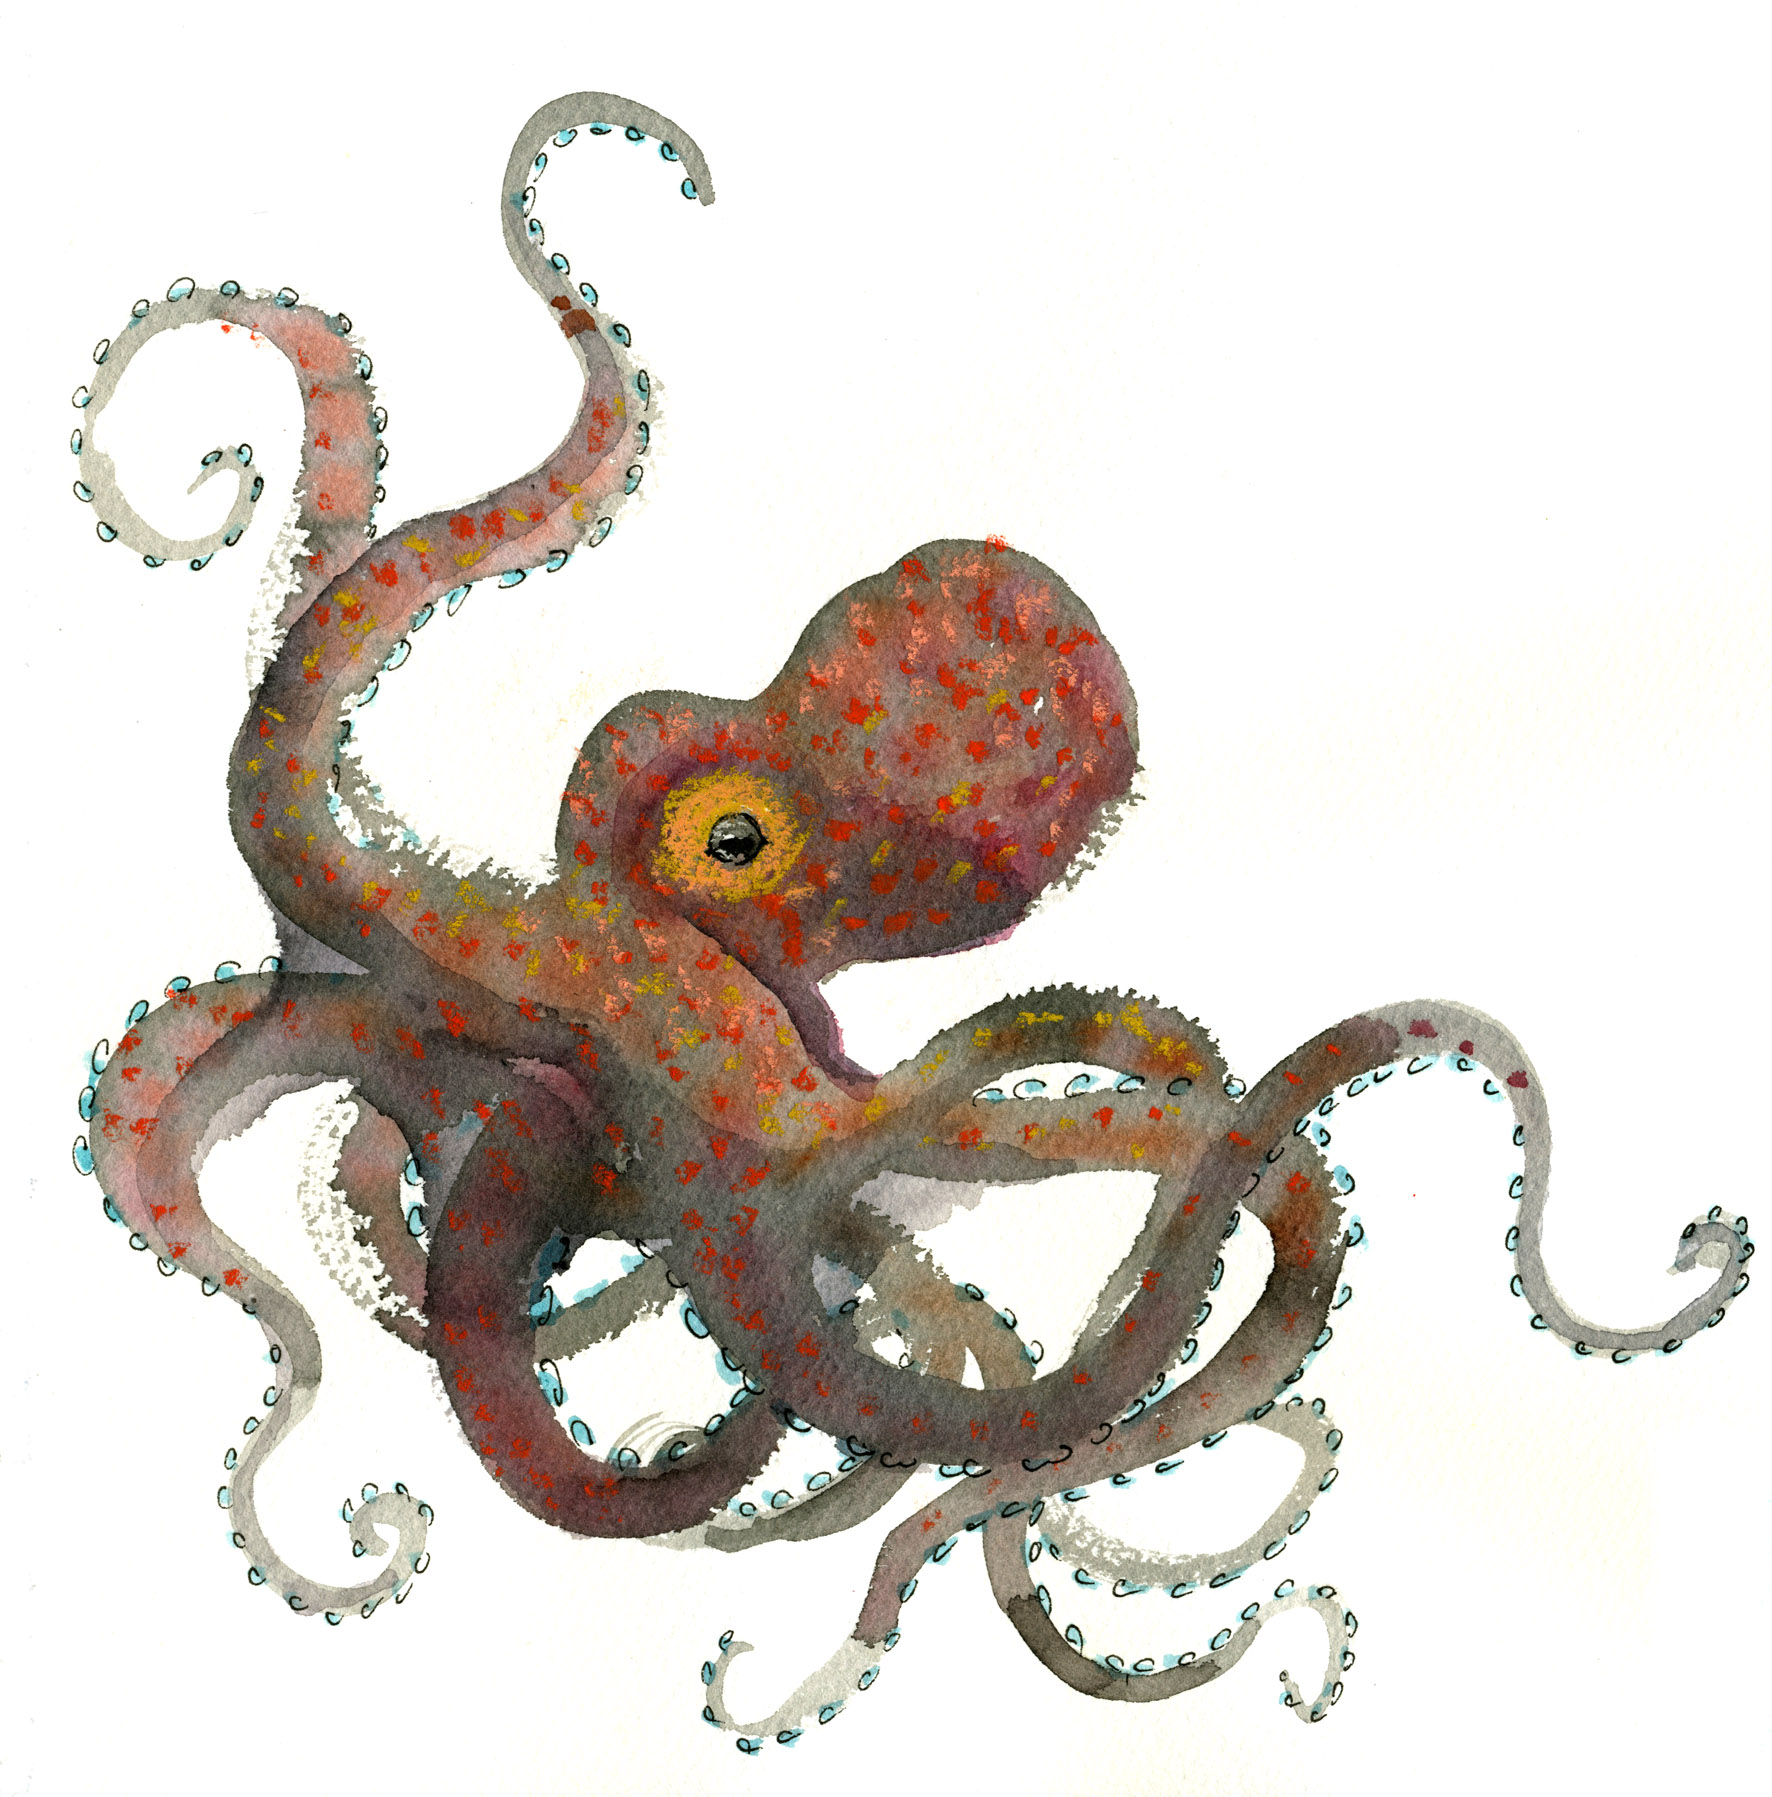 Octopus Tentacles Drawing at GetDrawings.com | Free for personal use ...